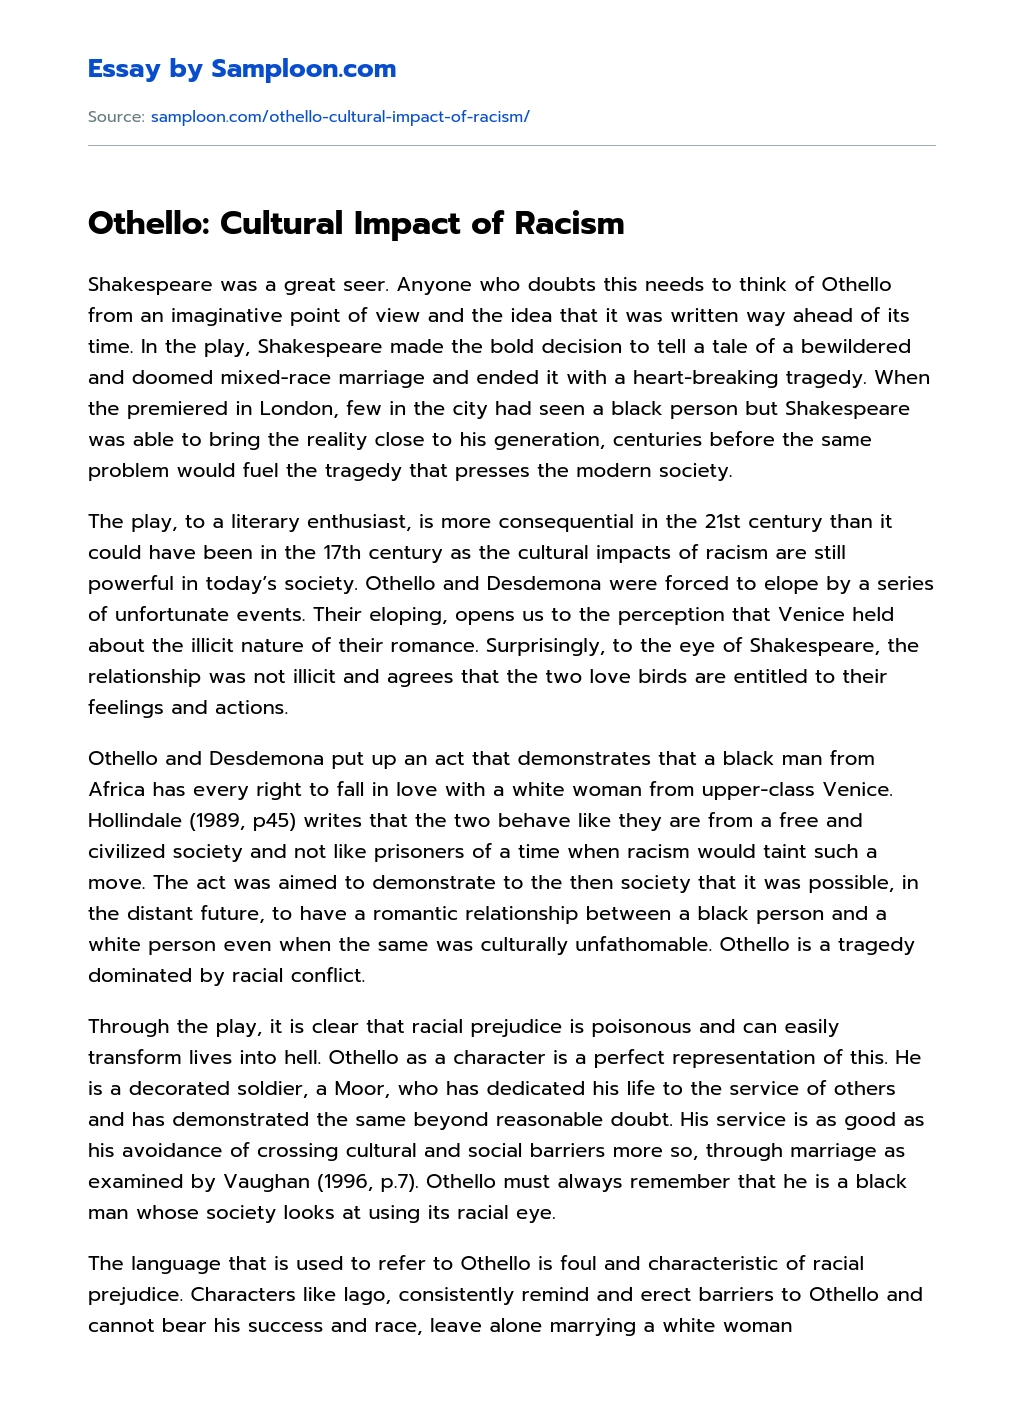 Othello: Cultural Impact of Racism essay